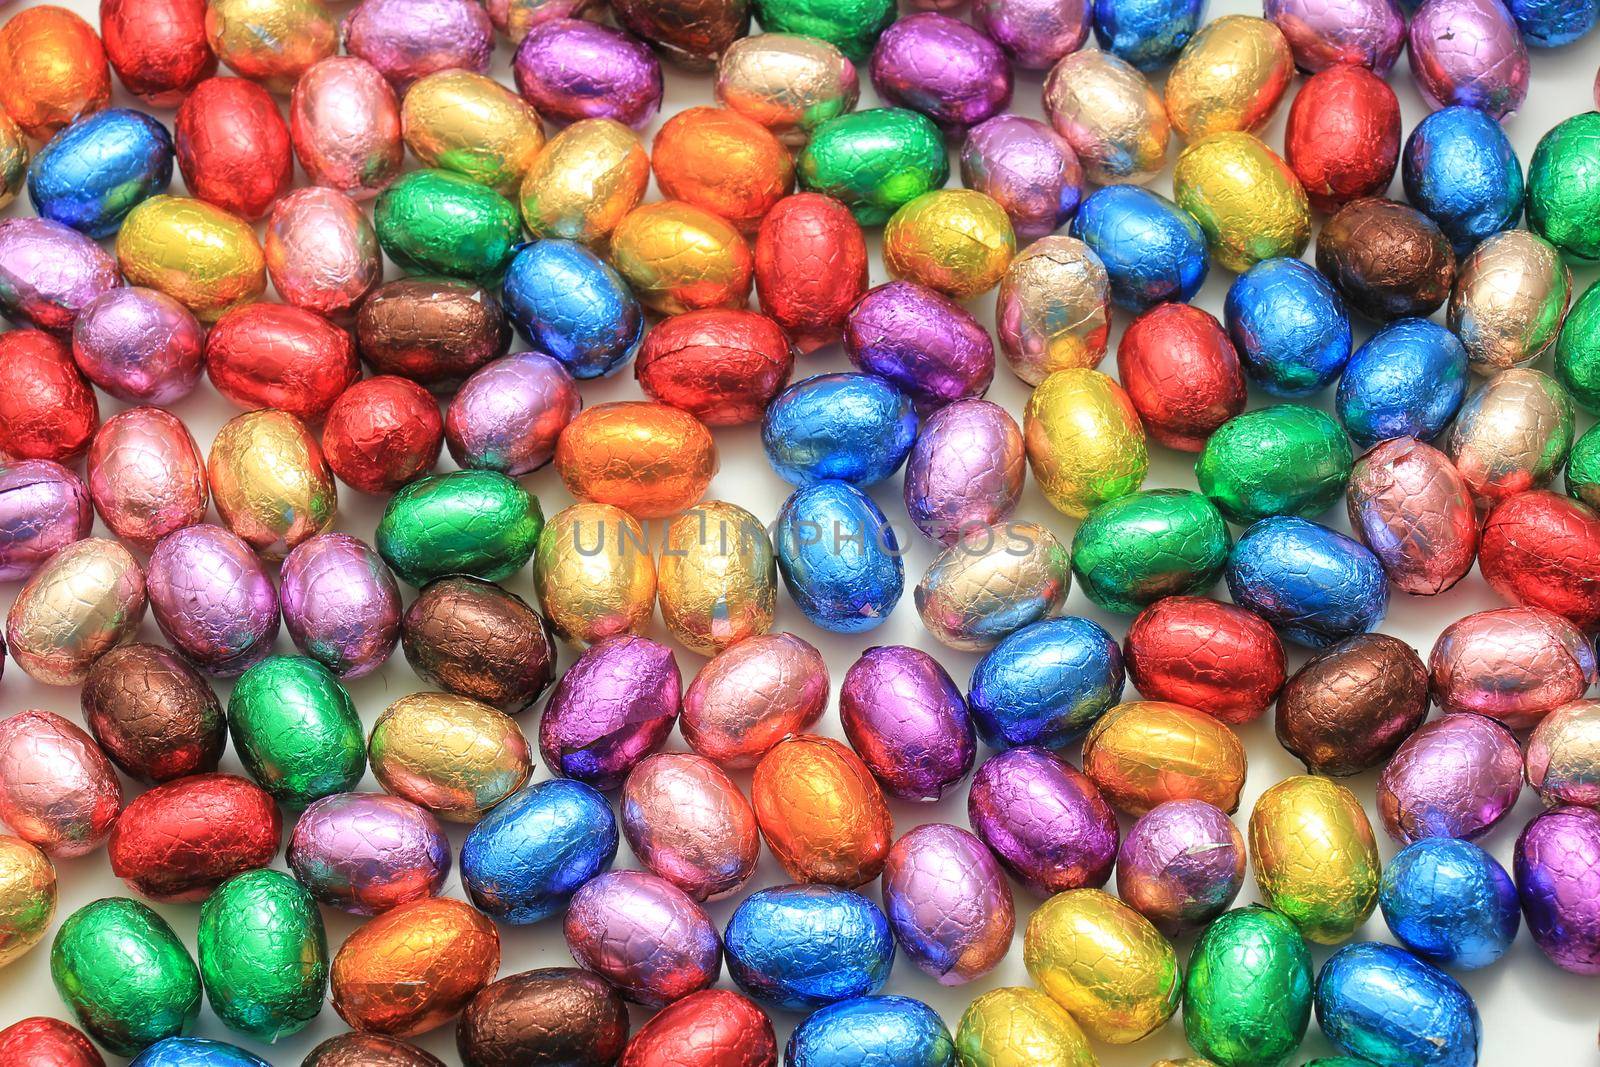 Big pile of colorful wrapped chocolate easter eggs by studioportosabbia